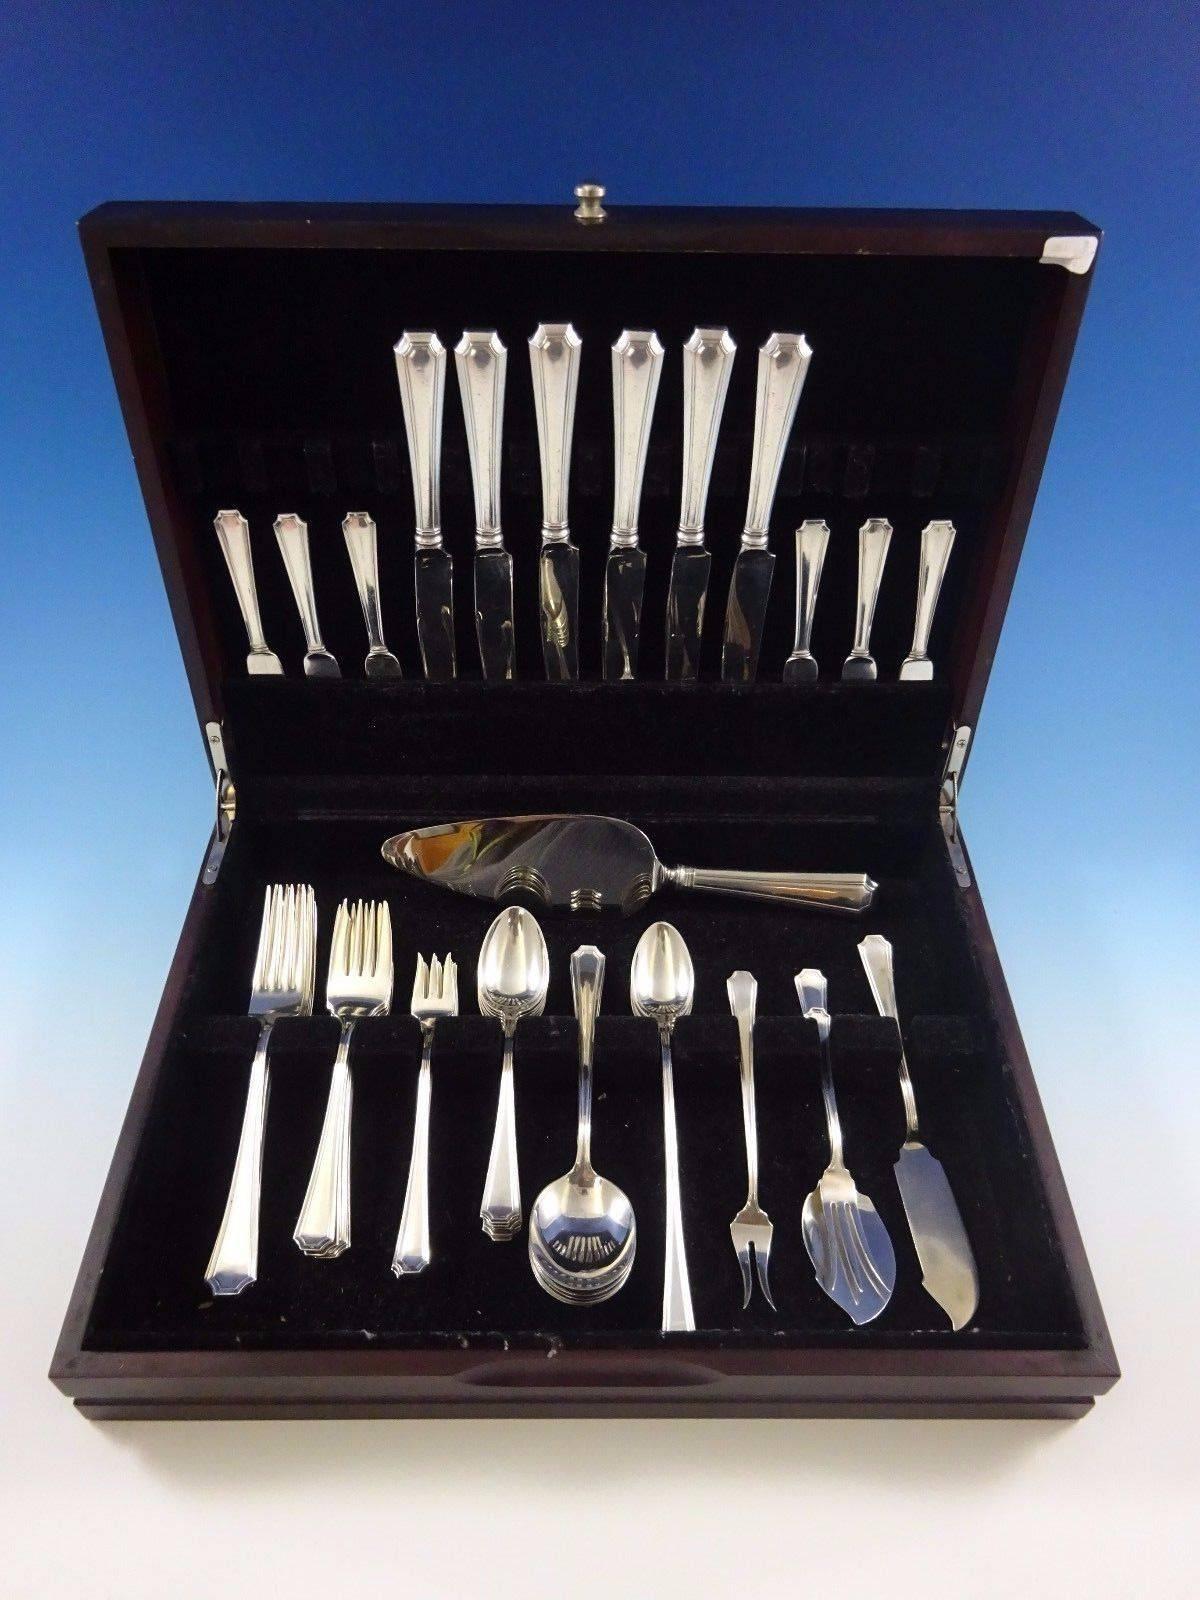 Fairfax by Durgin-Gorham sterling silver flatware set, 53 pieces. This set includes: 

Six knives, 8 7/8